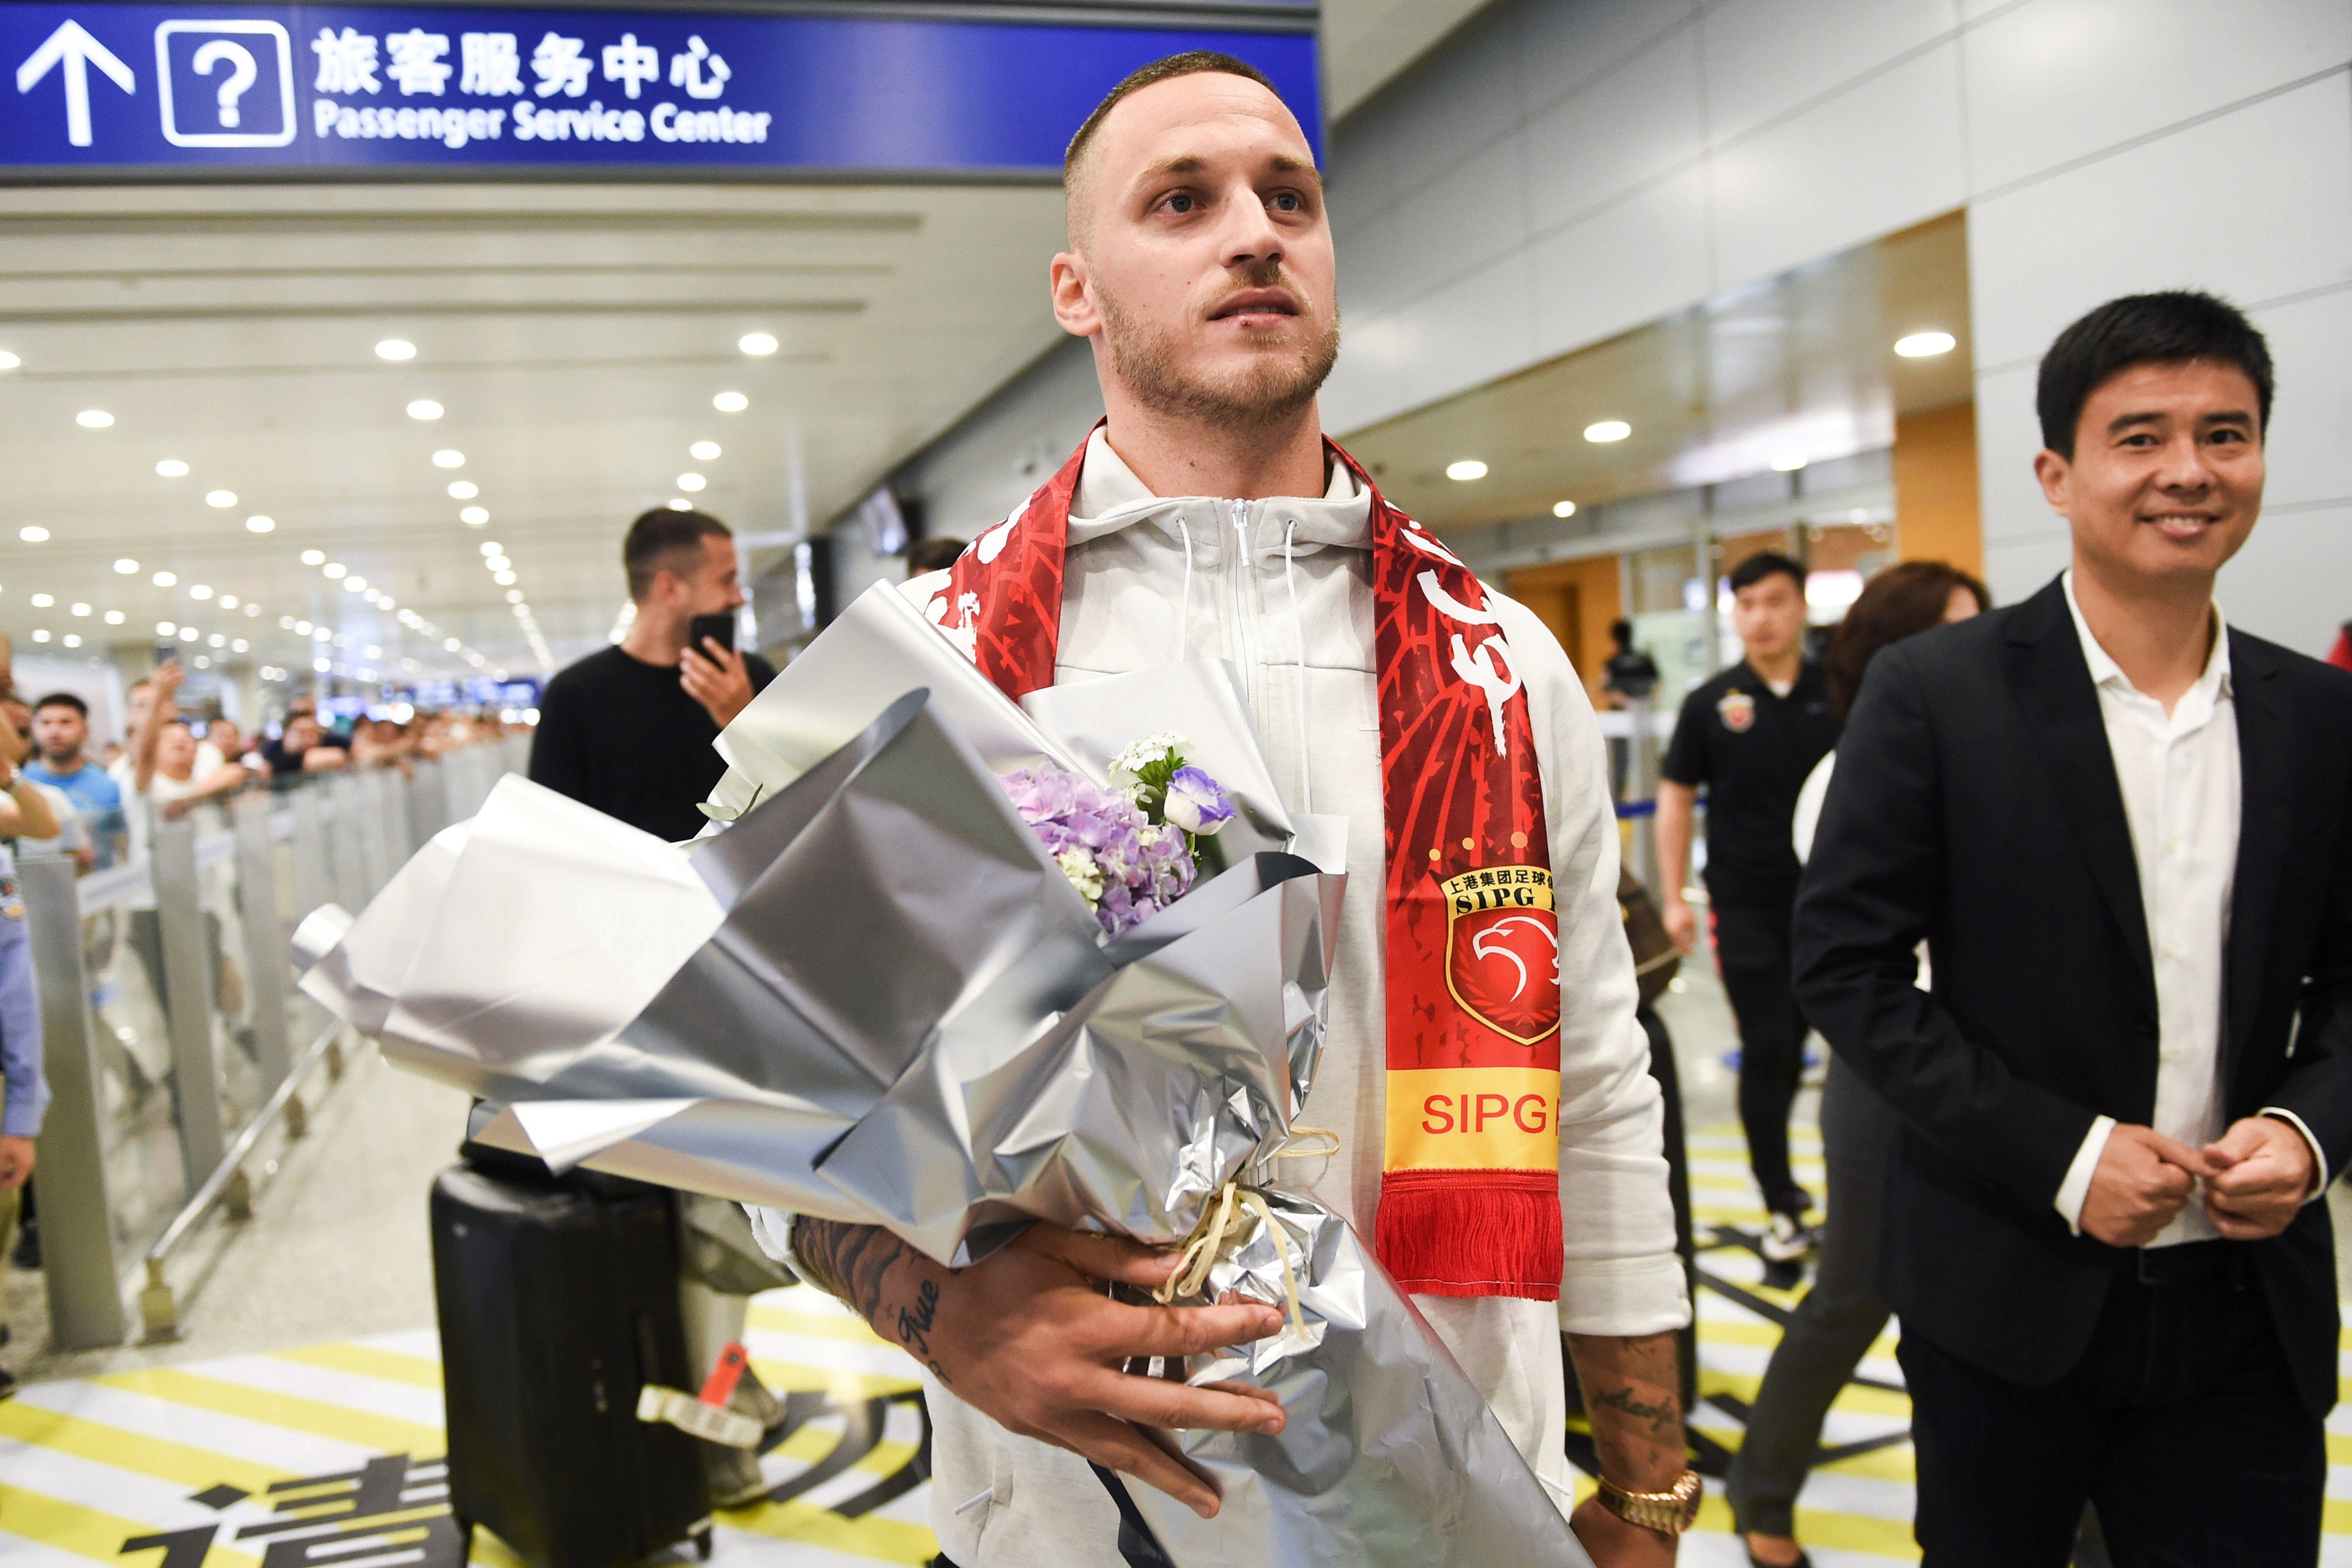 Marko Arnautovic arrives at Pudong International Airport after joining Chinese club Shanghai SIPG earlier this month. Photo: Reuters